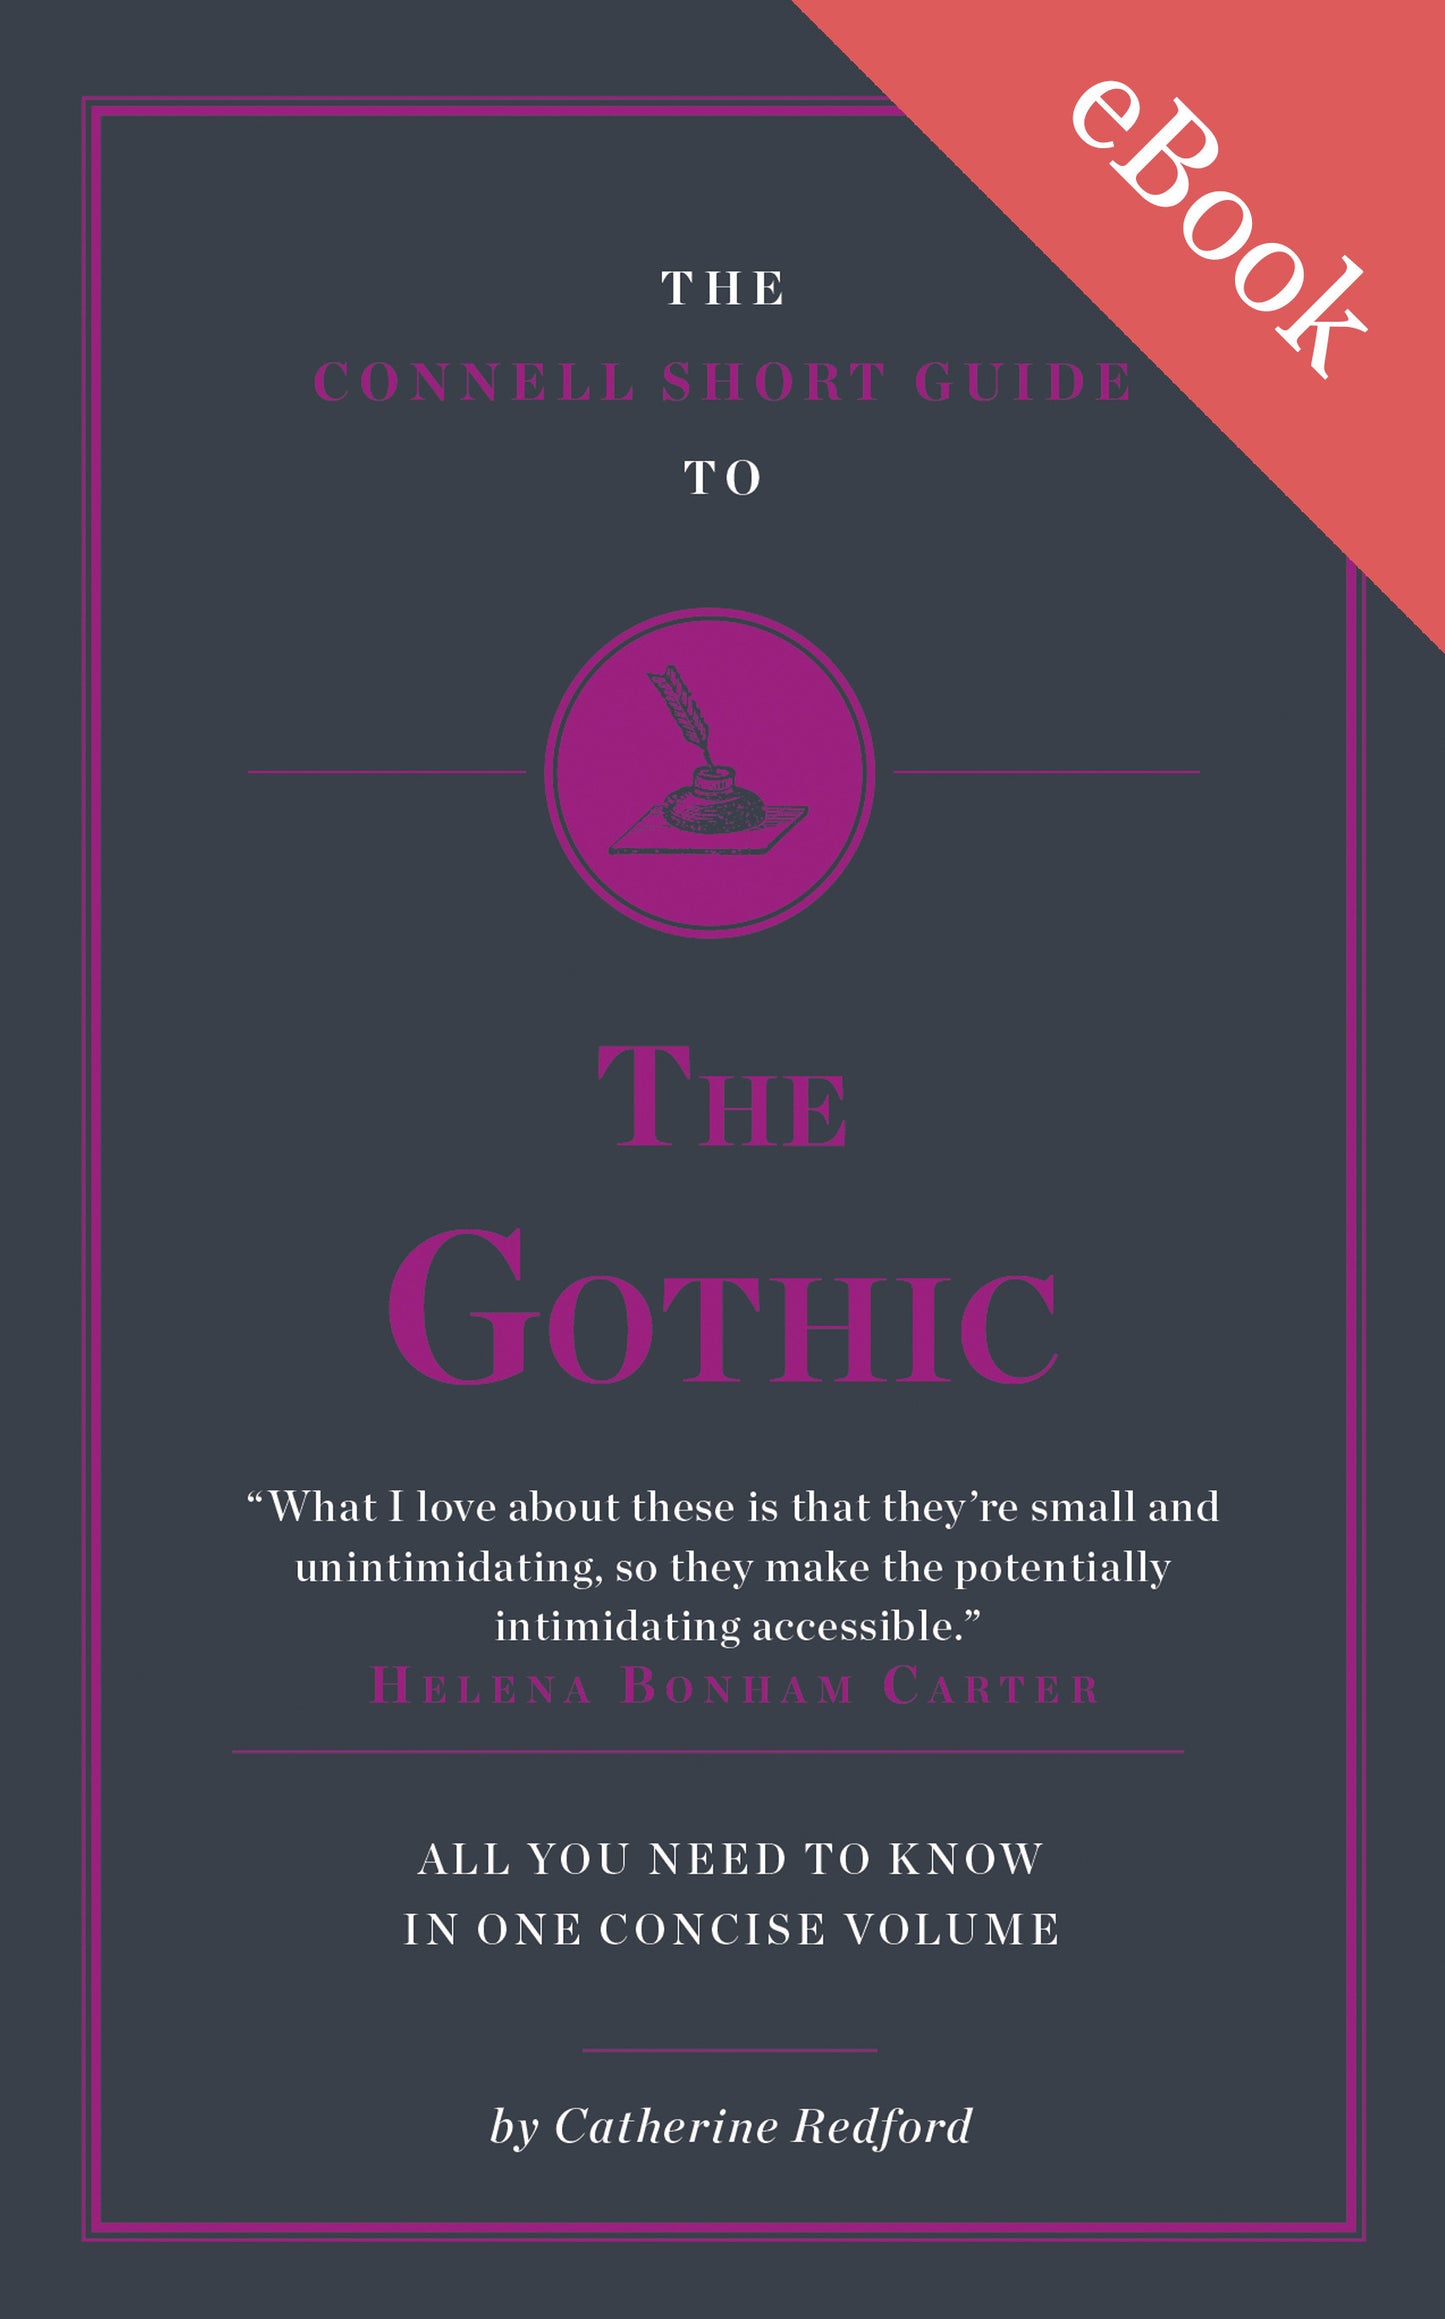 The Connell Guide to The Gothic